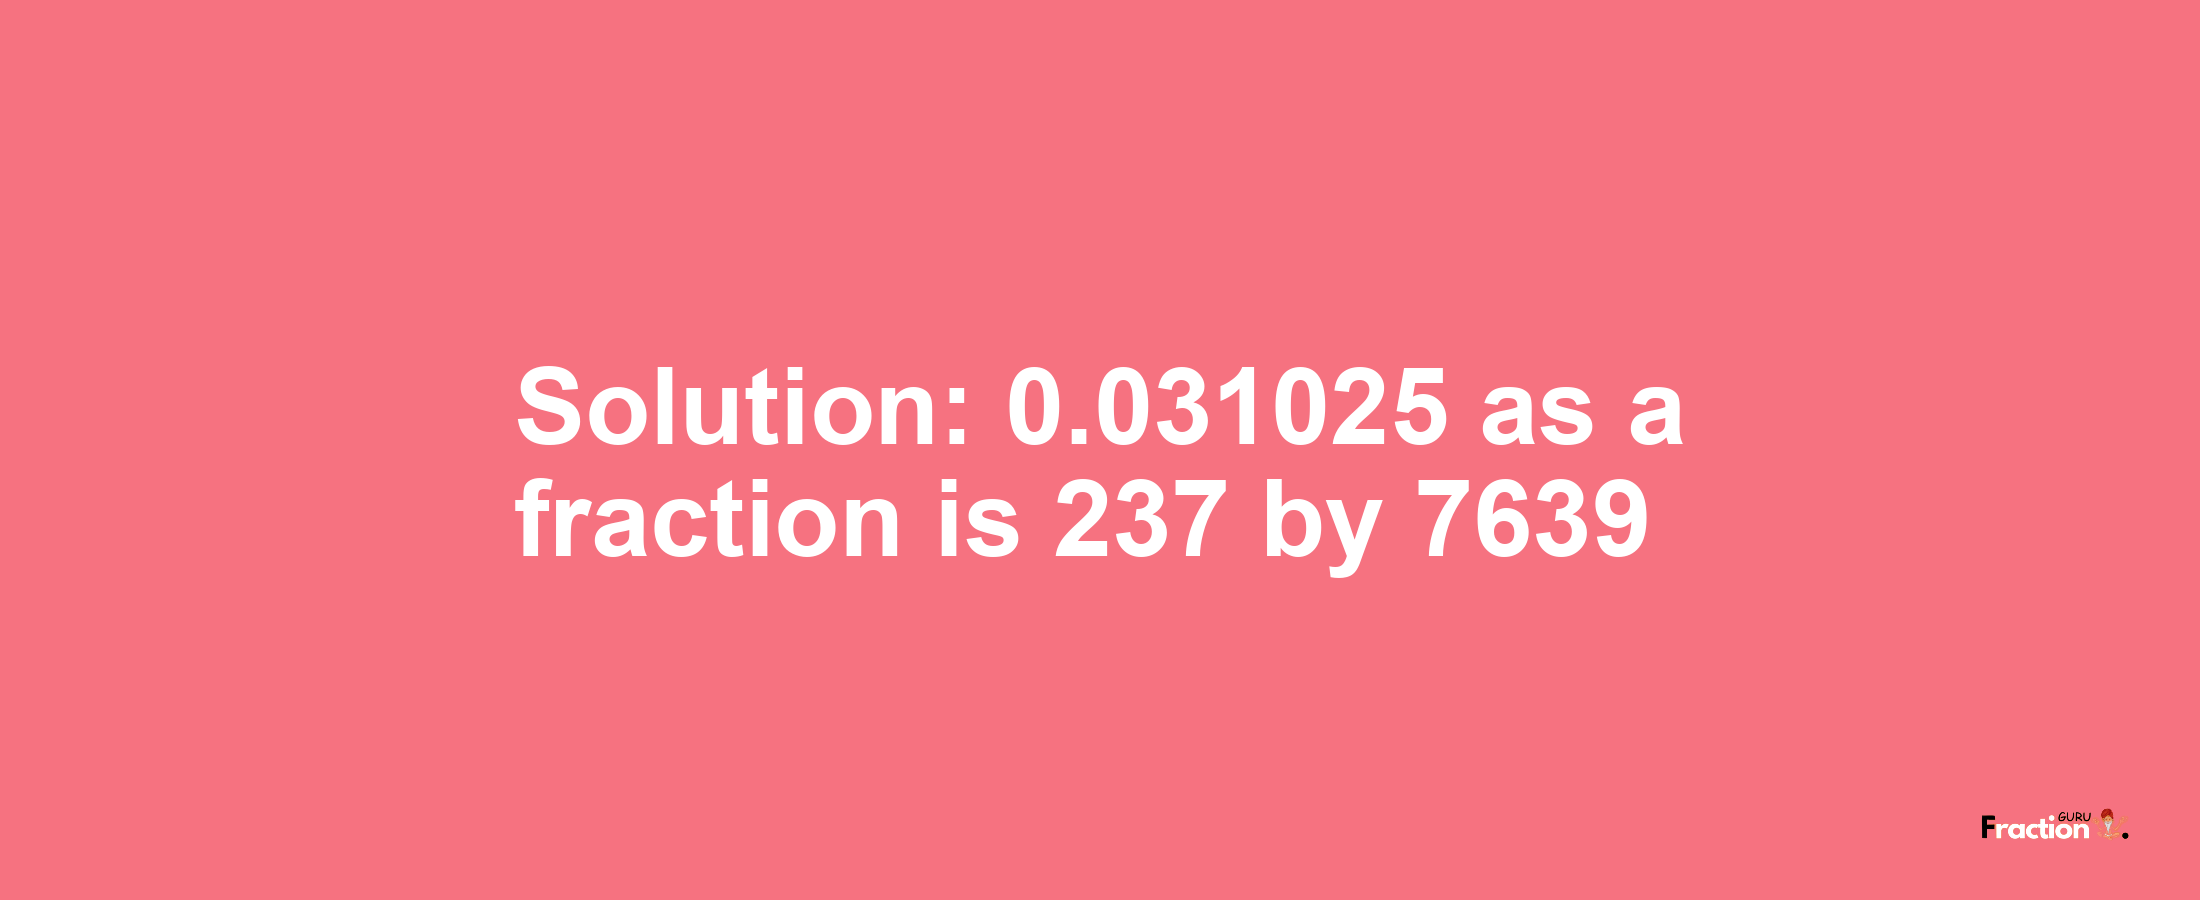 Solution:0.031025 as a fraction is 237/7639